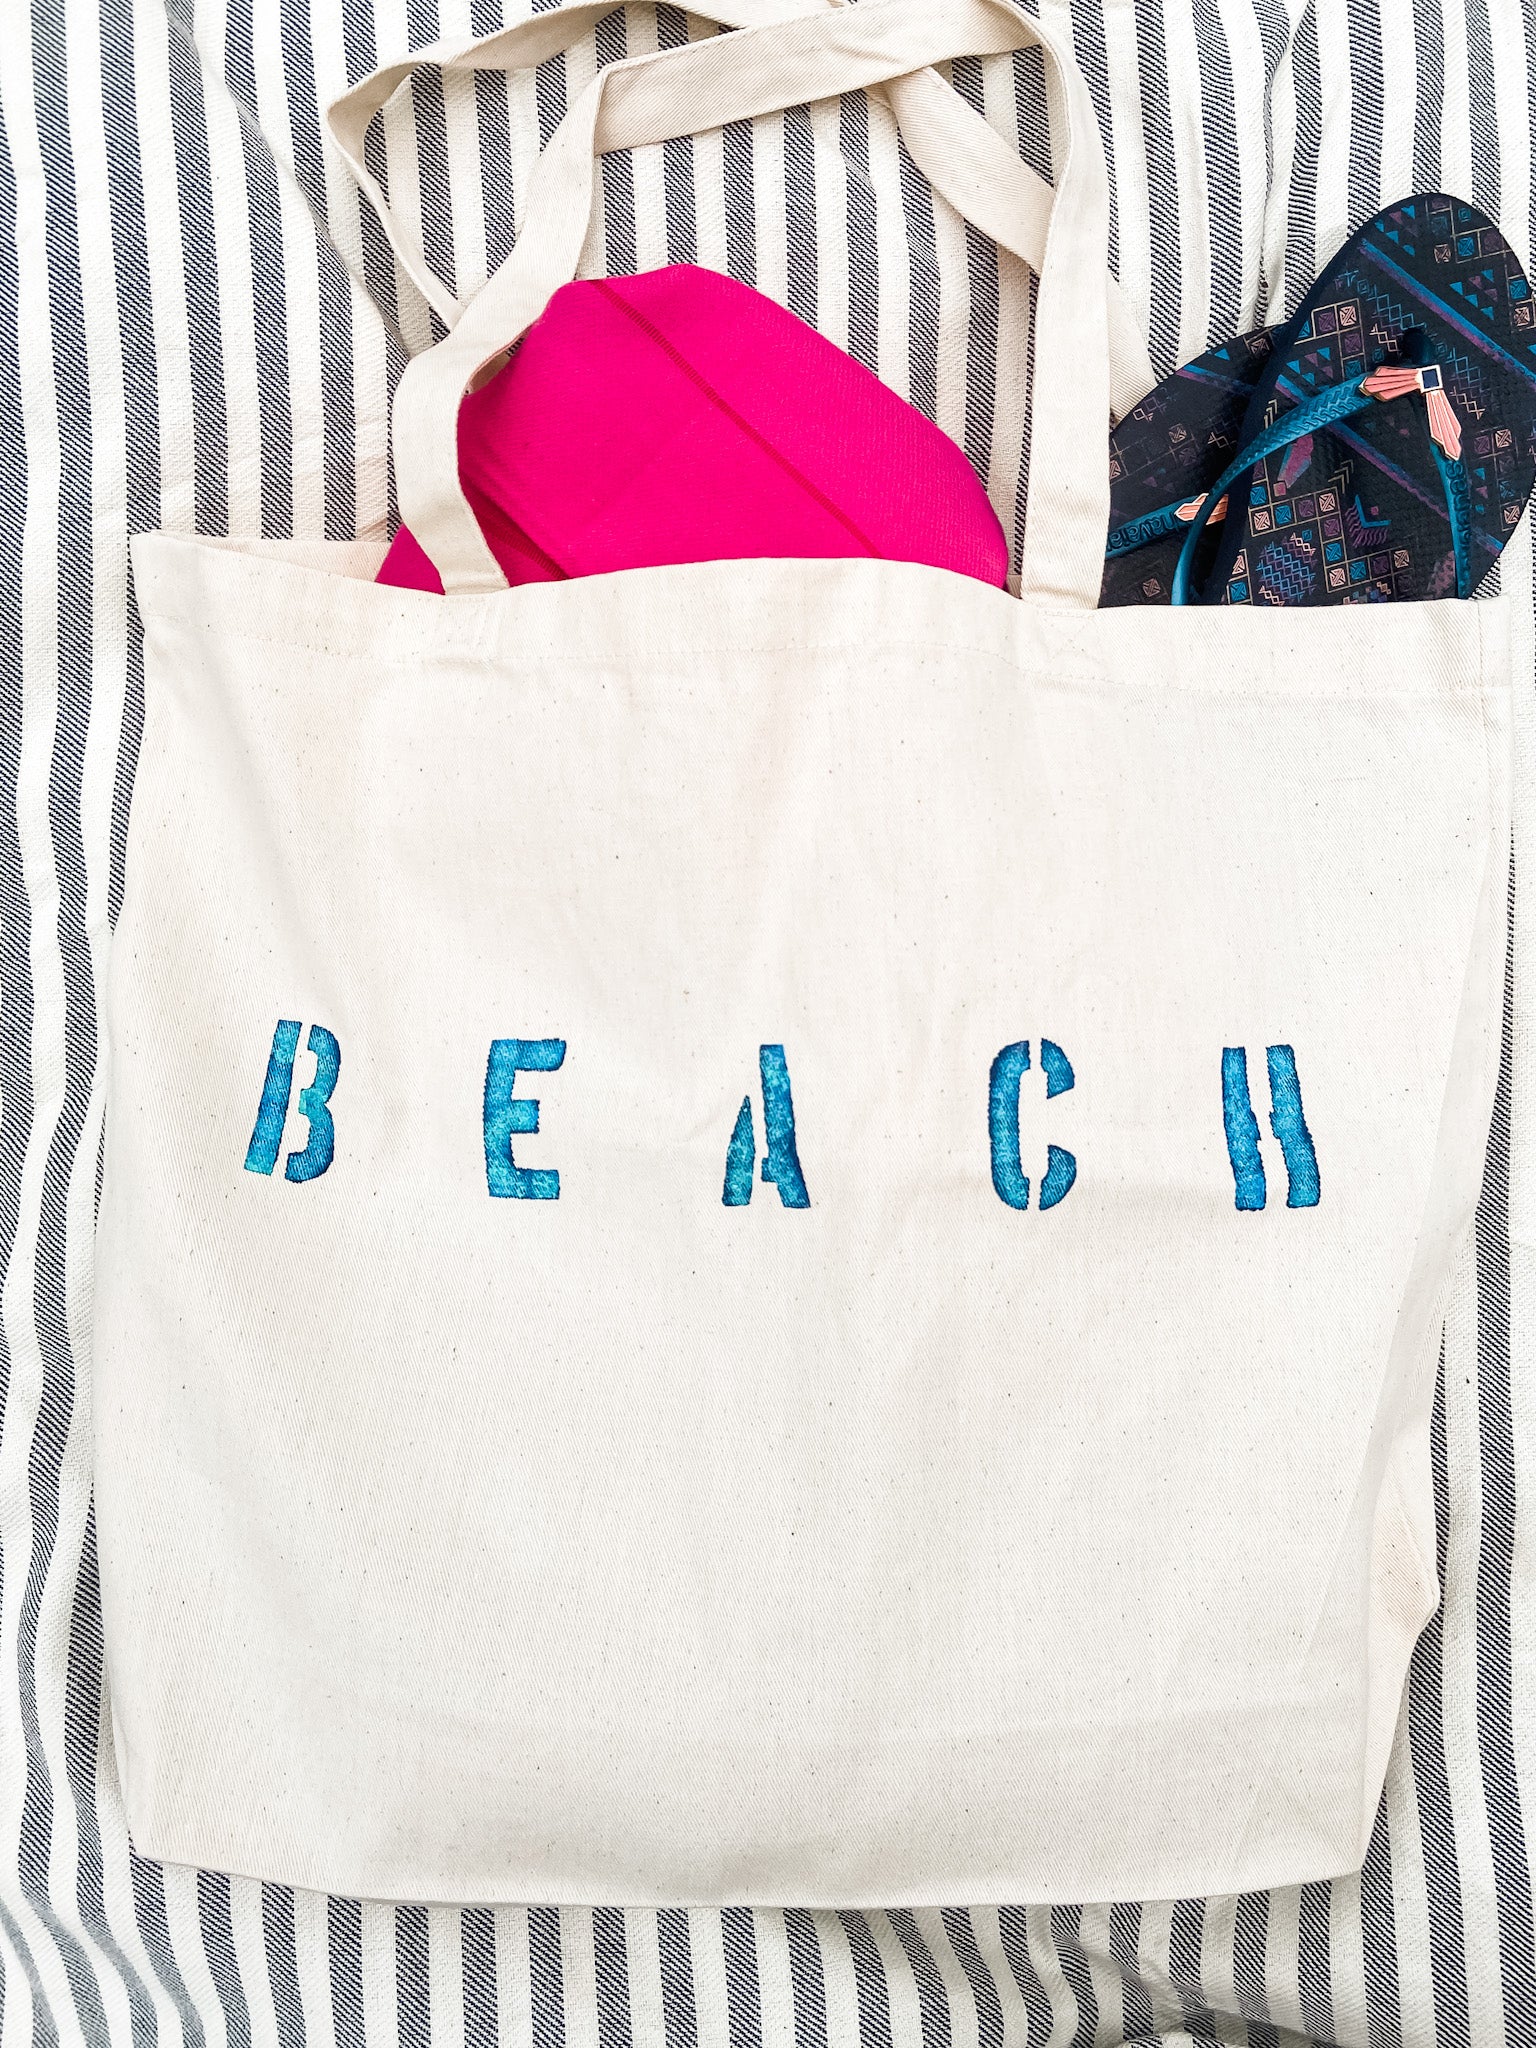 Beach Canvas Tote - Salt and Branch